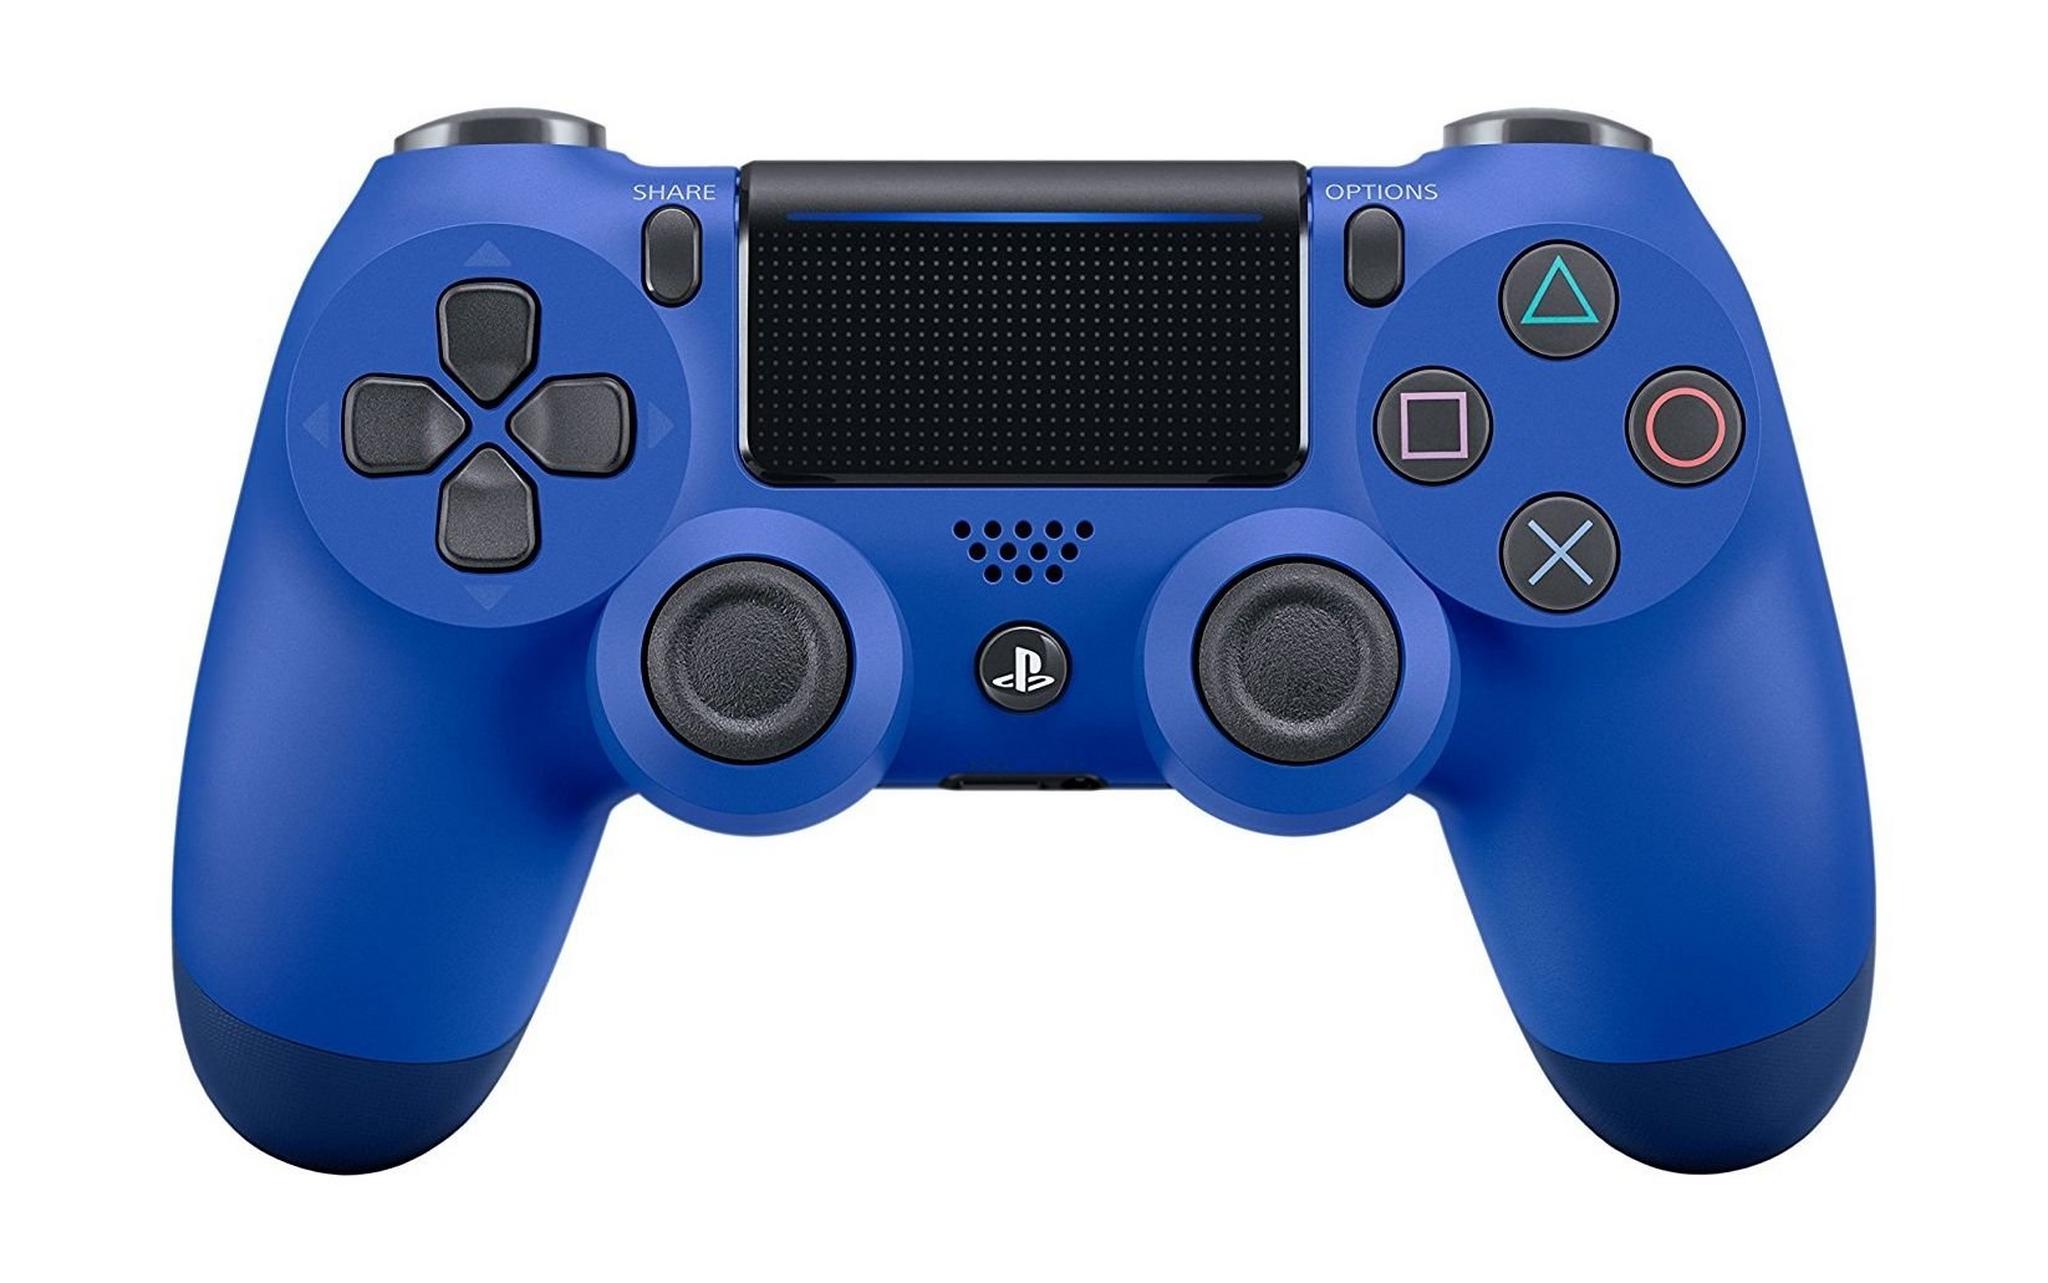 Sony PS4 Controller DualShock 4 Wireless Blue + Super Bomberman R: PlayStation 4 Game